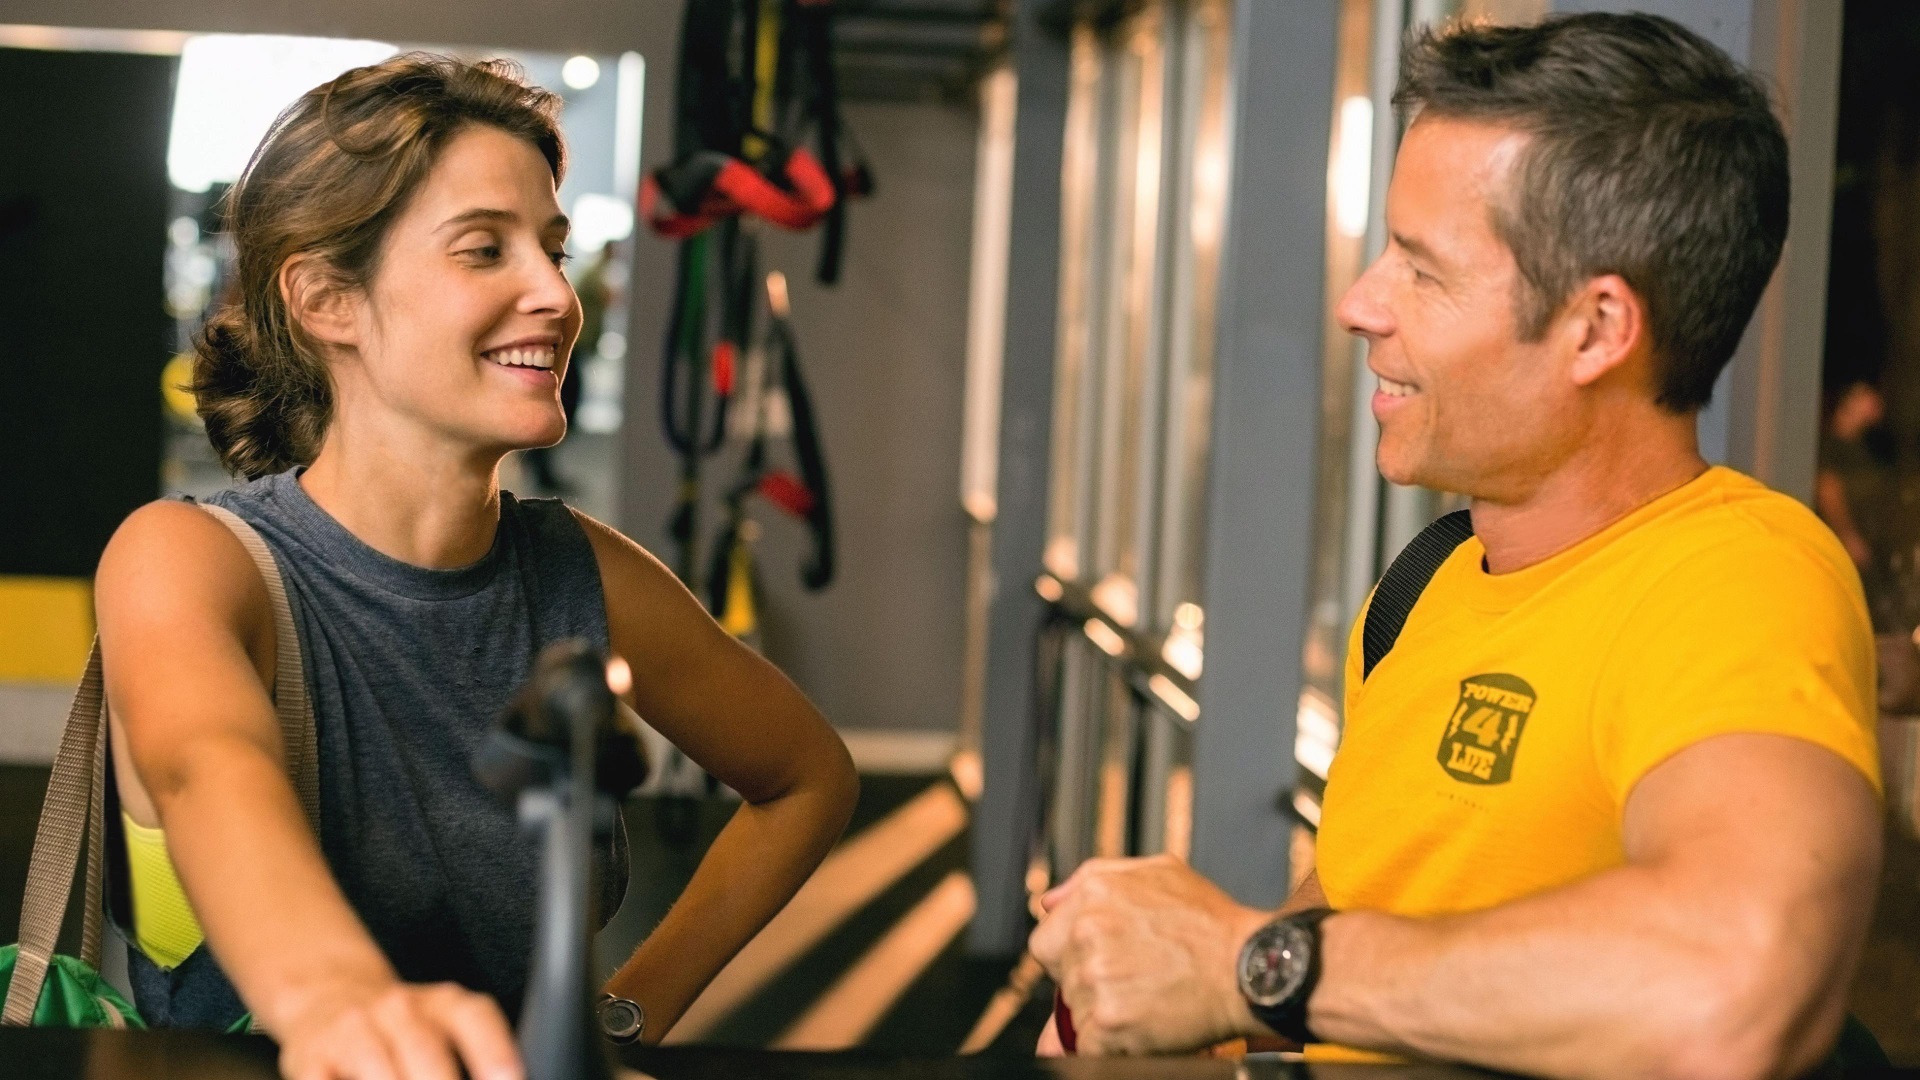 movie, results, cobie smulders, guy pearce